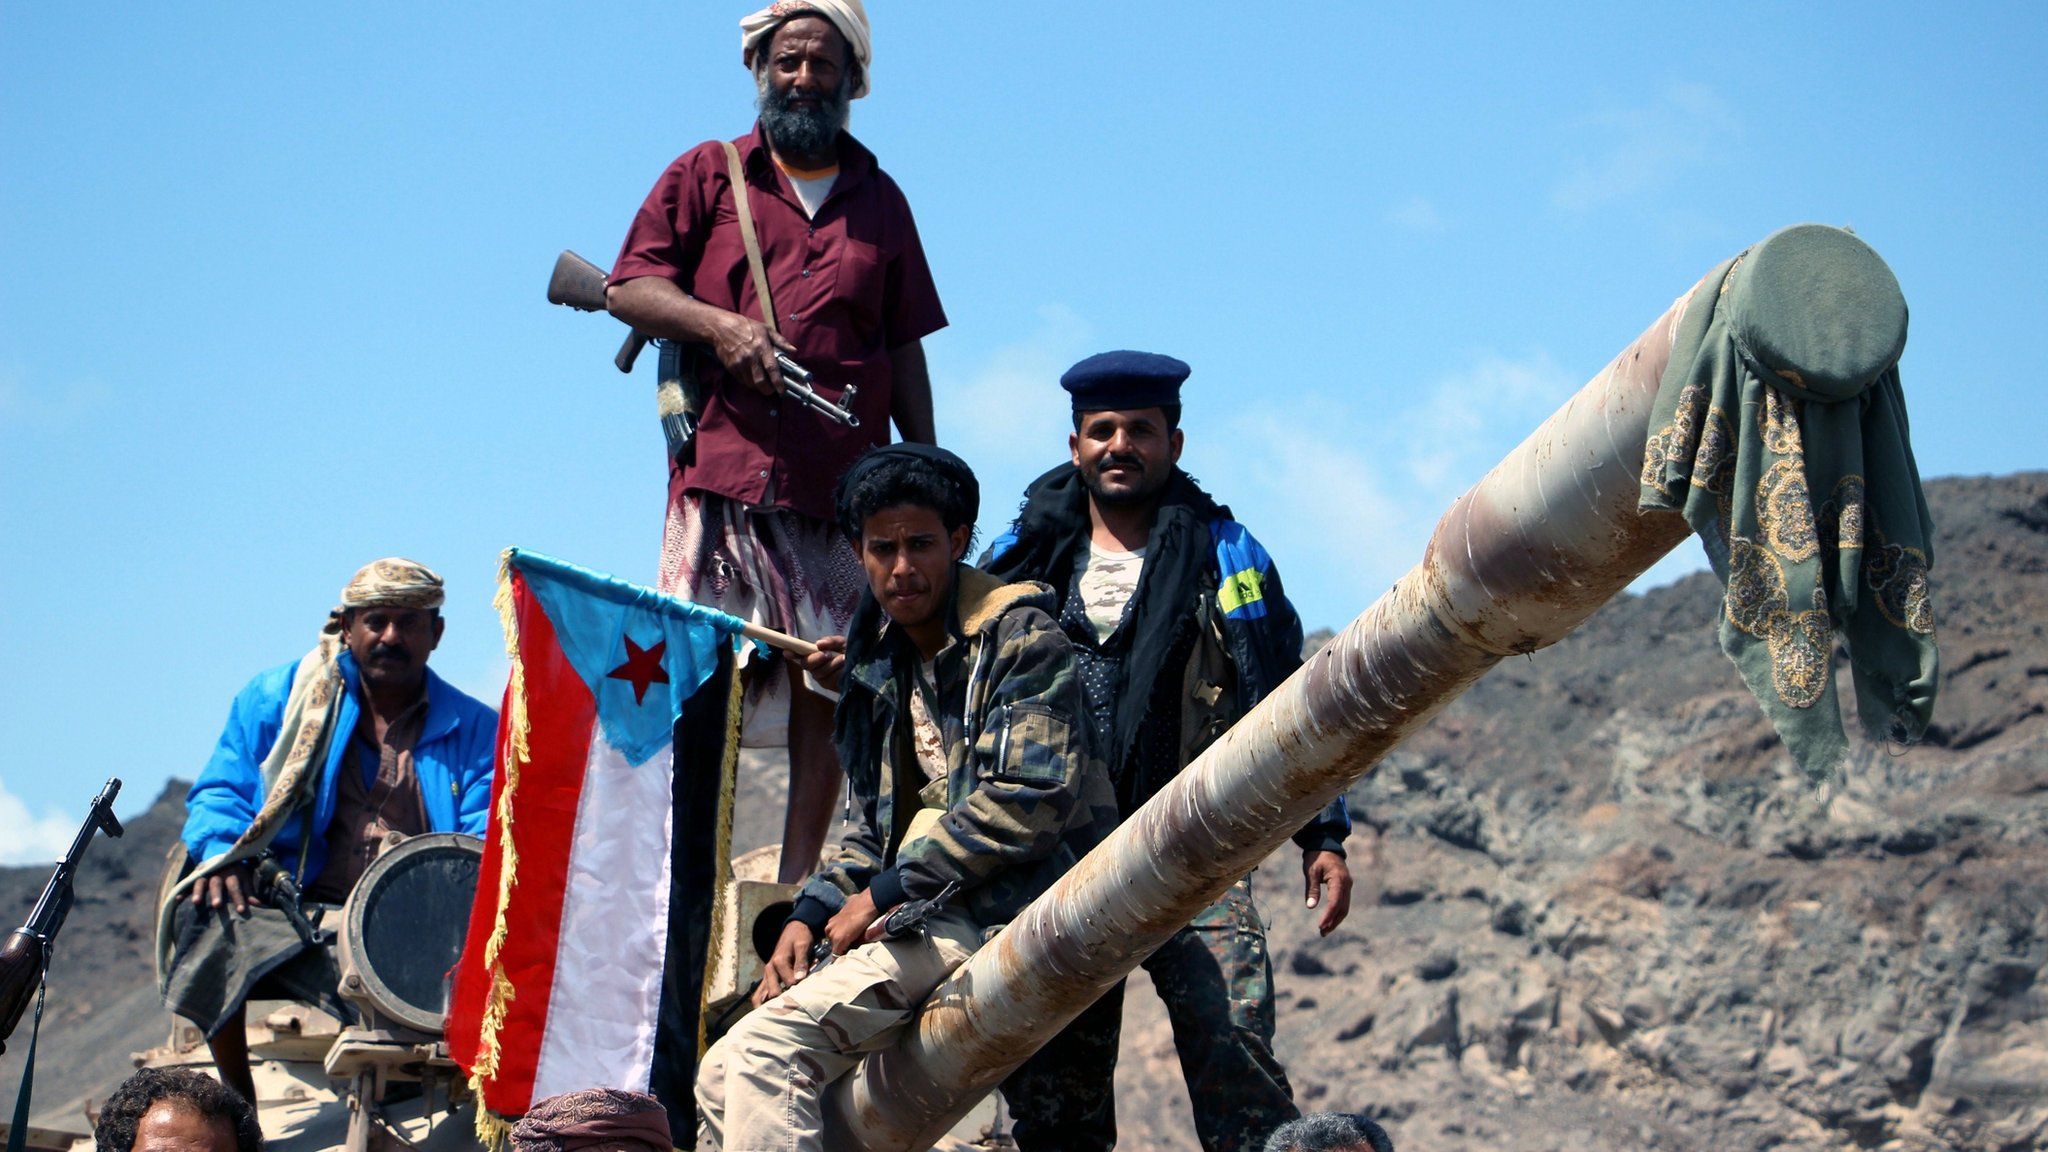 Separatist fighters stationed at a checkpoint in the Khor Maksar district of Aden, Yemen (30 January 2018)